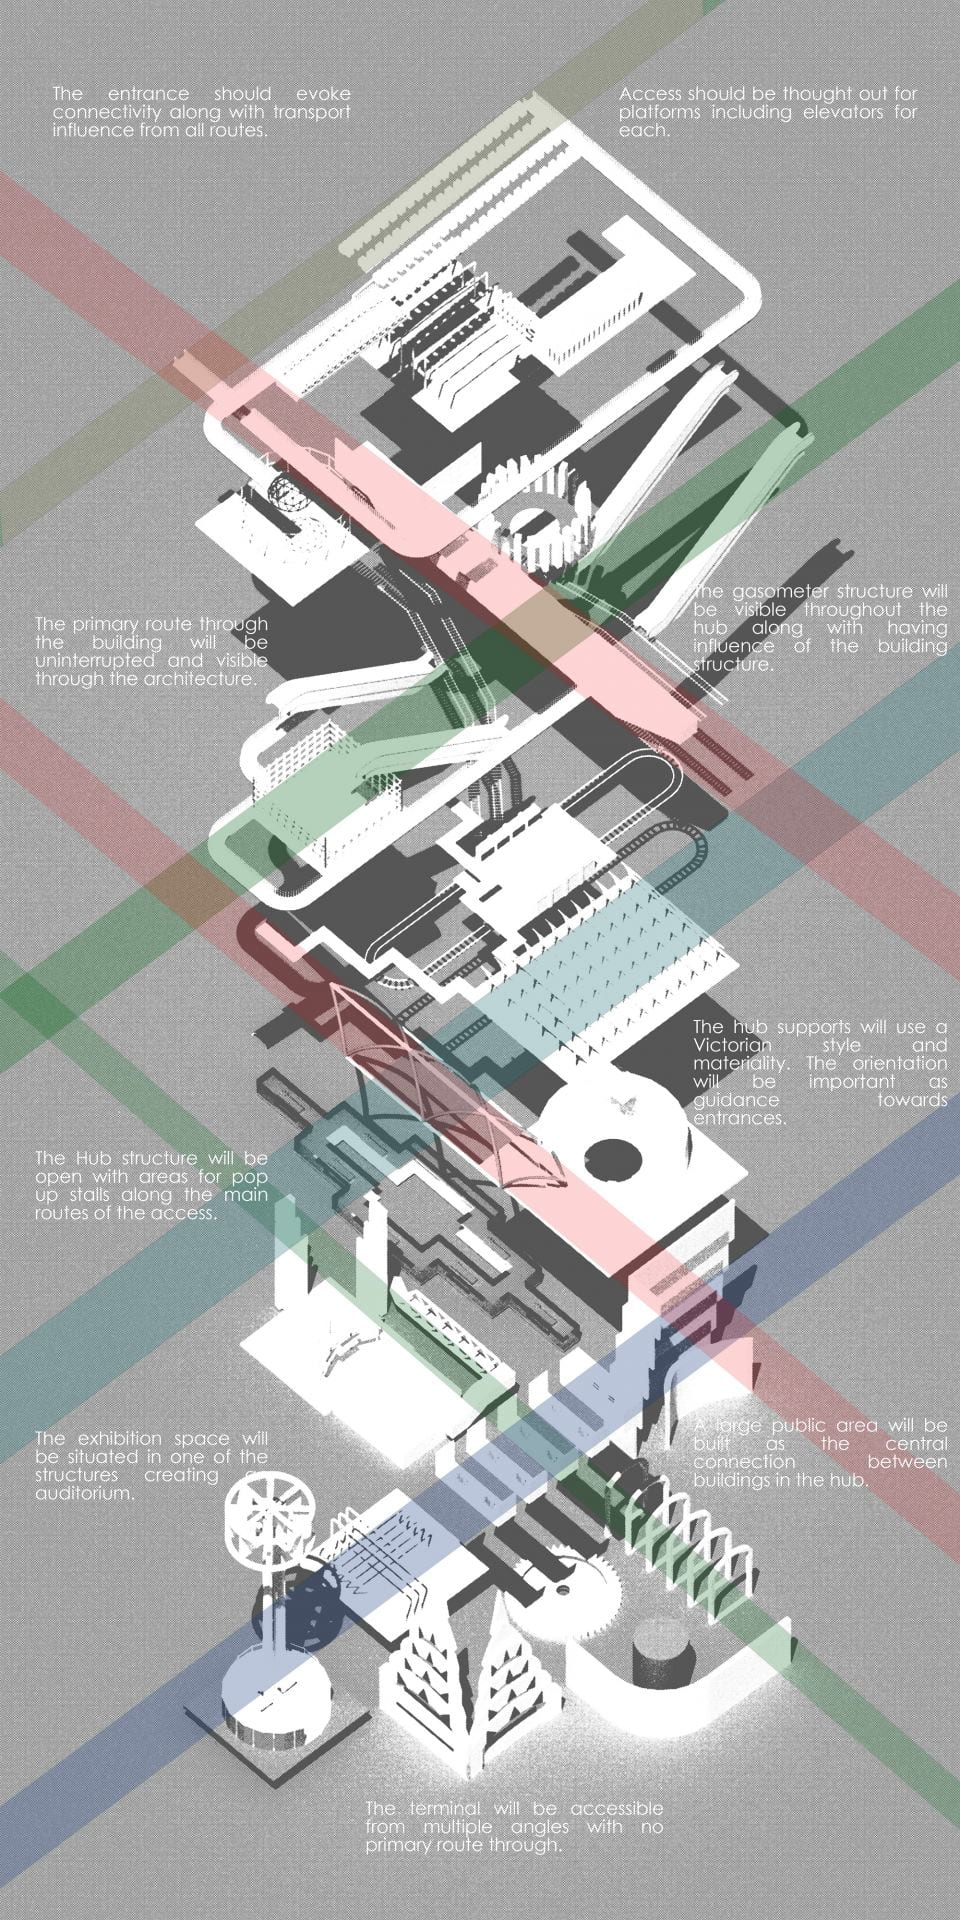 Axonometric diagram showing the concept behind the transit hub design.